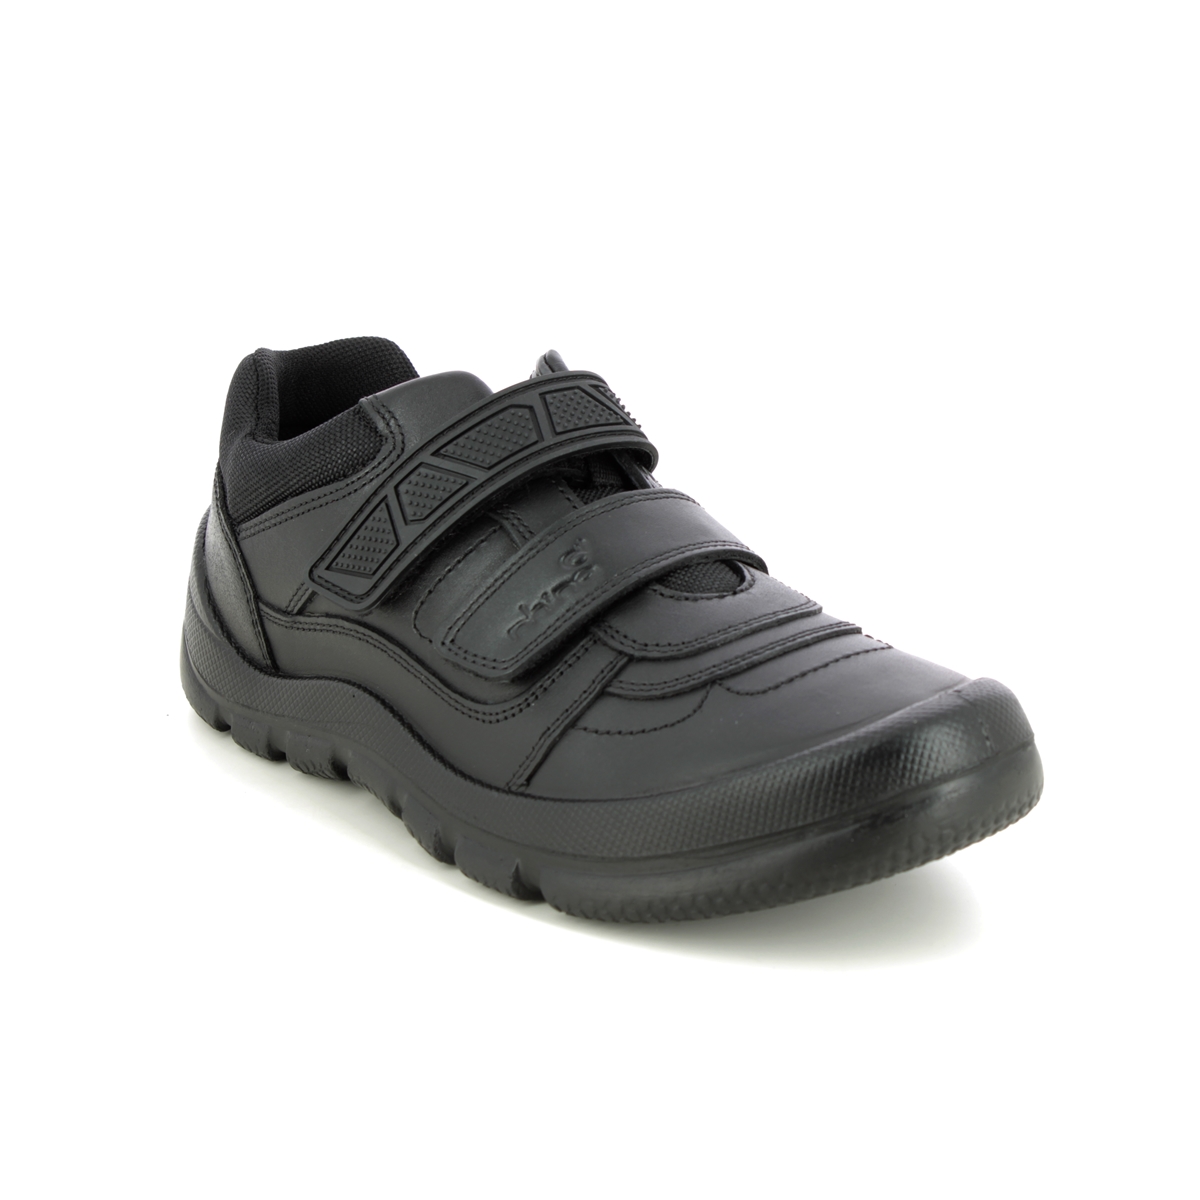 Start Rite Rhino Warrior Black leather Kids Boys Shoes 8237-76F in a Plain Leather in Size 5